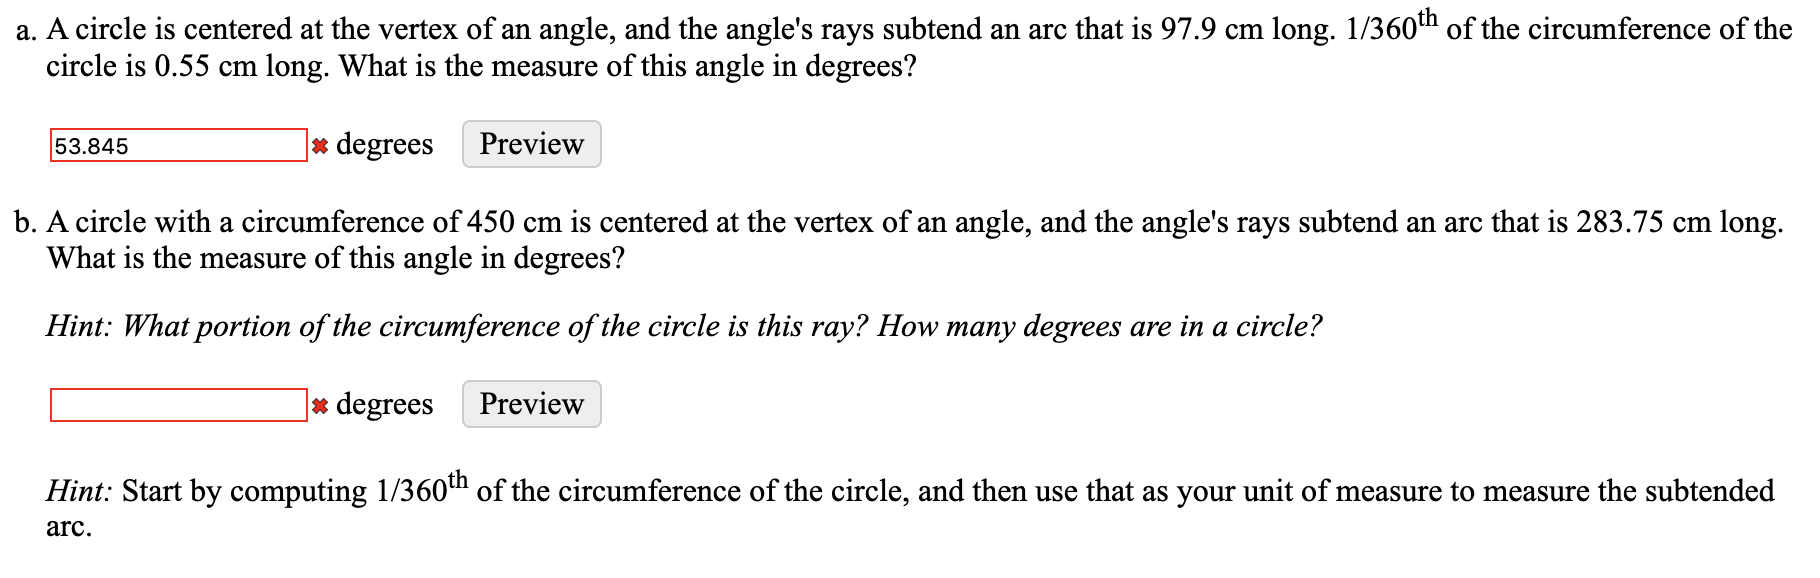 a. A circle is centered at the vertex of an angle, and the angle's rays subtend an arc that is 97.9 cm long. 1/360th of the circumference of the
circle is 0.55 cm long. What is the measure of this angle in degrees?
]* degrees
53.845
Preview
b. A circle with a circumference of 450 cm is centered at the vertex of an angle, and the angle's rays subtend an arc that is 283.75 cm long.
What is the measure of this angle in degrees?
Hint: What portion of the circumference of the circle is this ray? How many degrees are in a circle?
* degrees
Preview
Hint: Start by computing 1/360" of the circumference of the circle, and then use that as your unit of measure to measure the subtended
arc.
